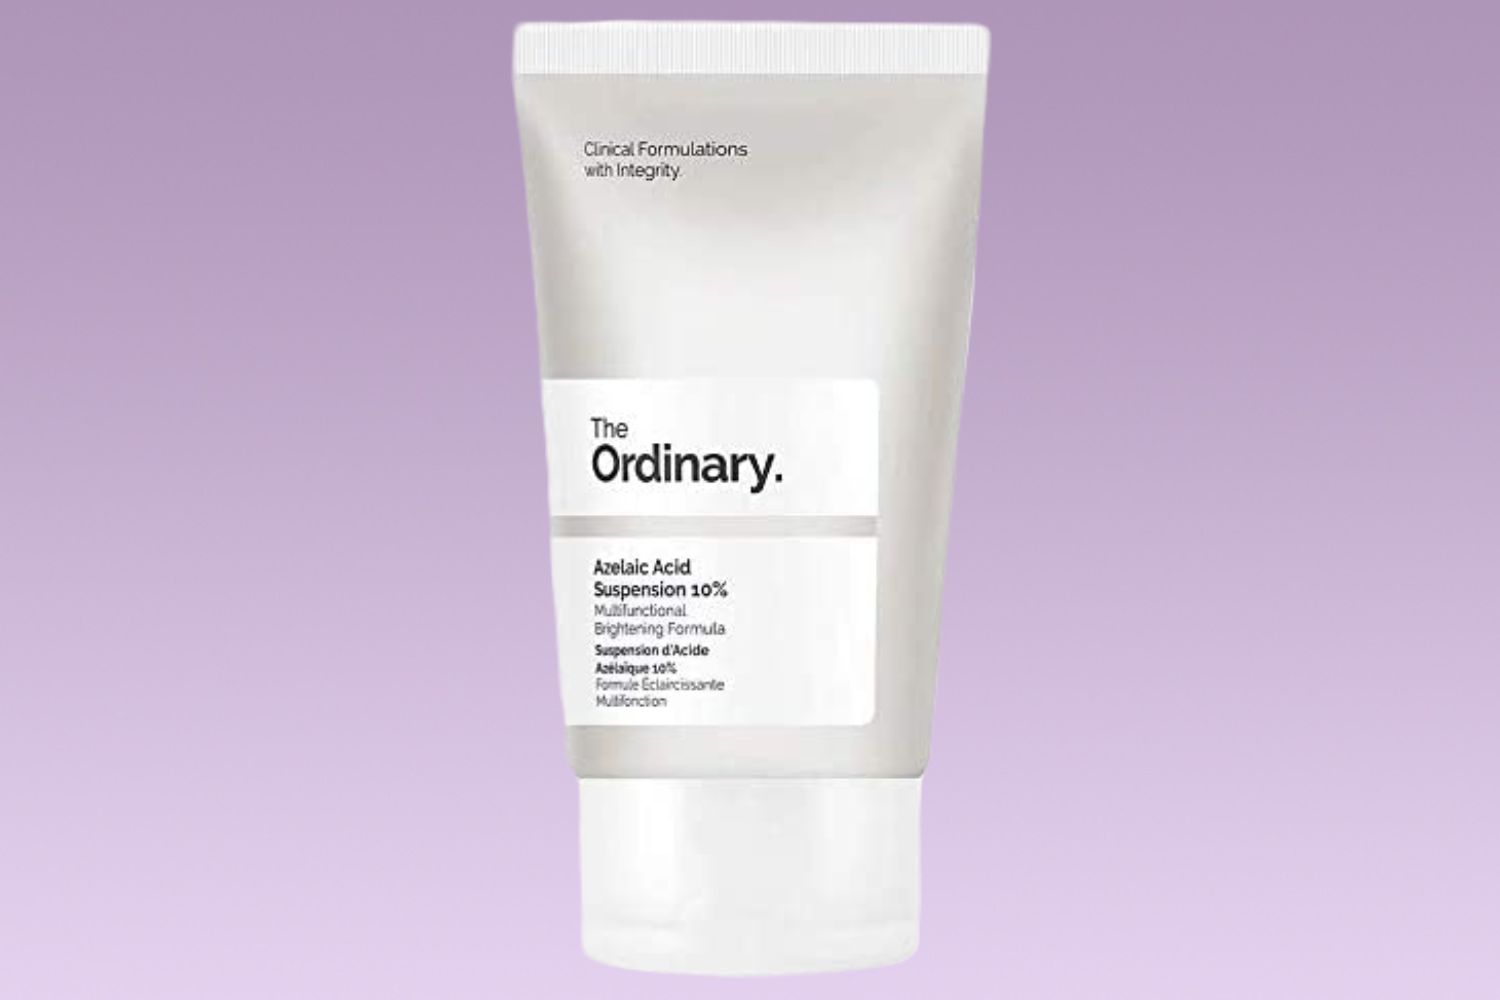 The Ordinary Azelaic Acid 10 Percent, Viral Beauty and Skincare products